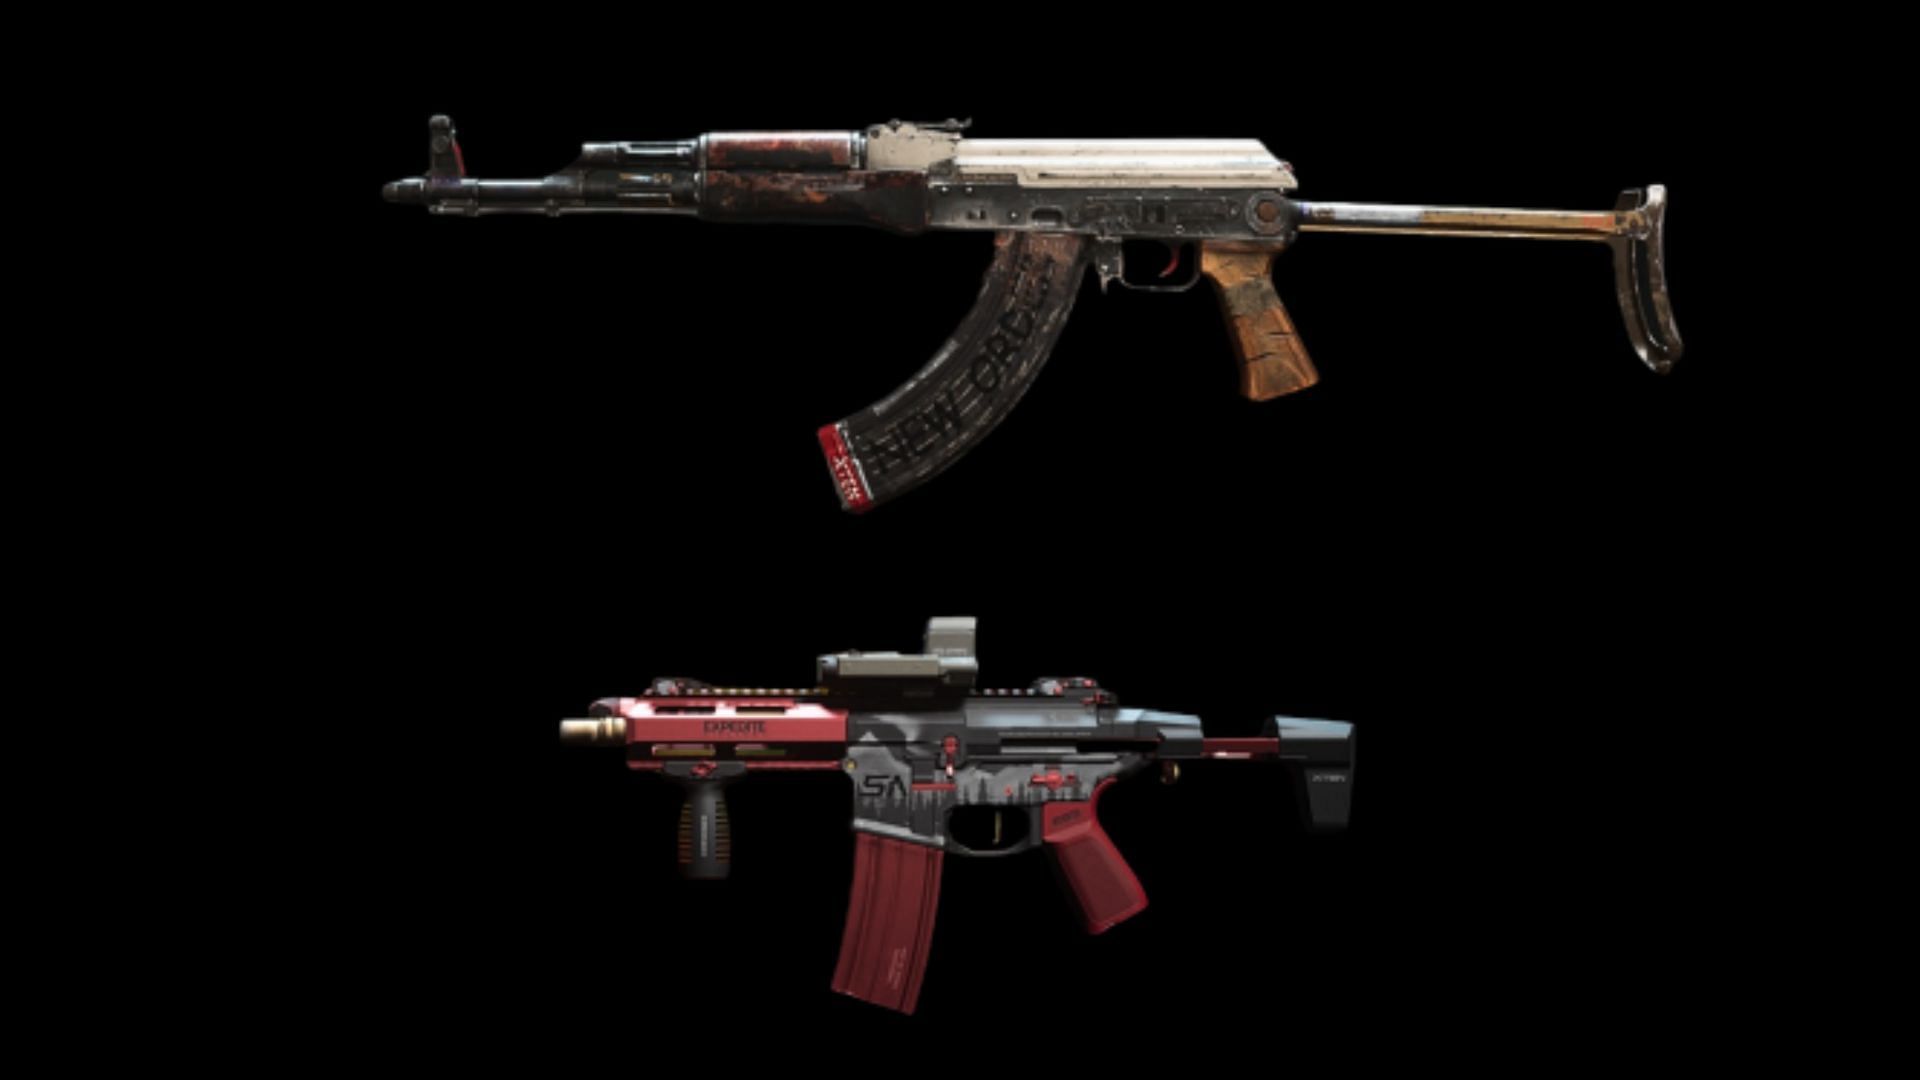 The Kastov 762 and Chimera assault rifles in Warzone 2 (Image via Activision)